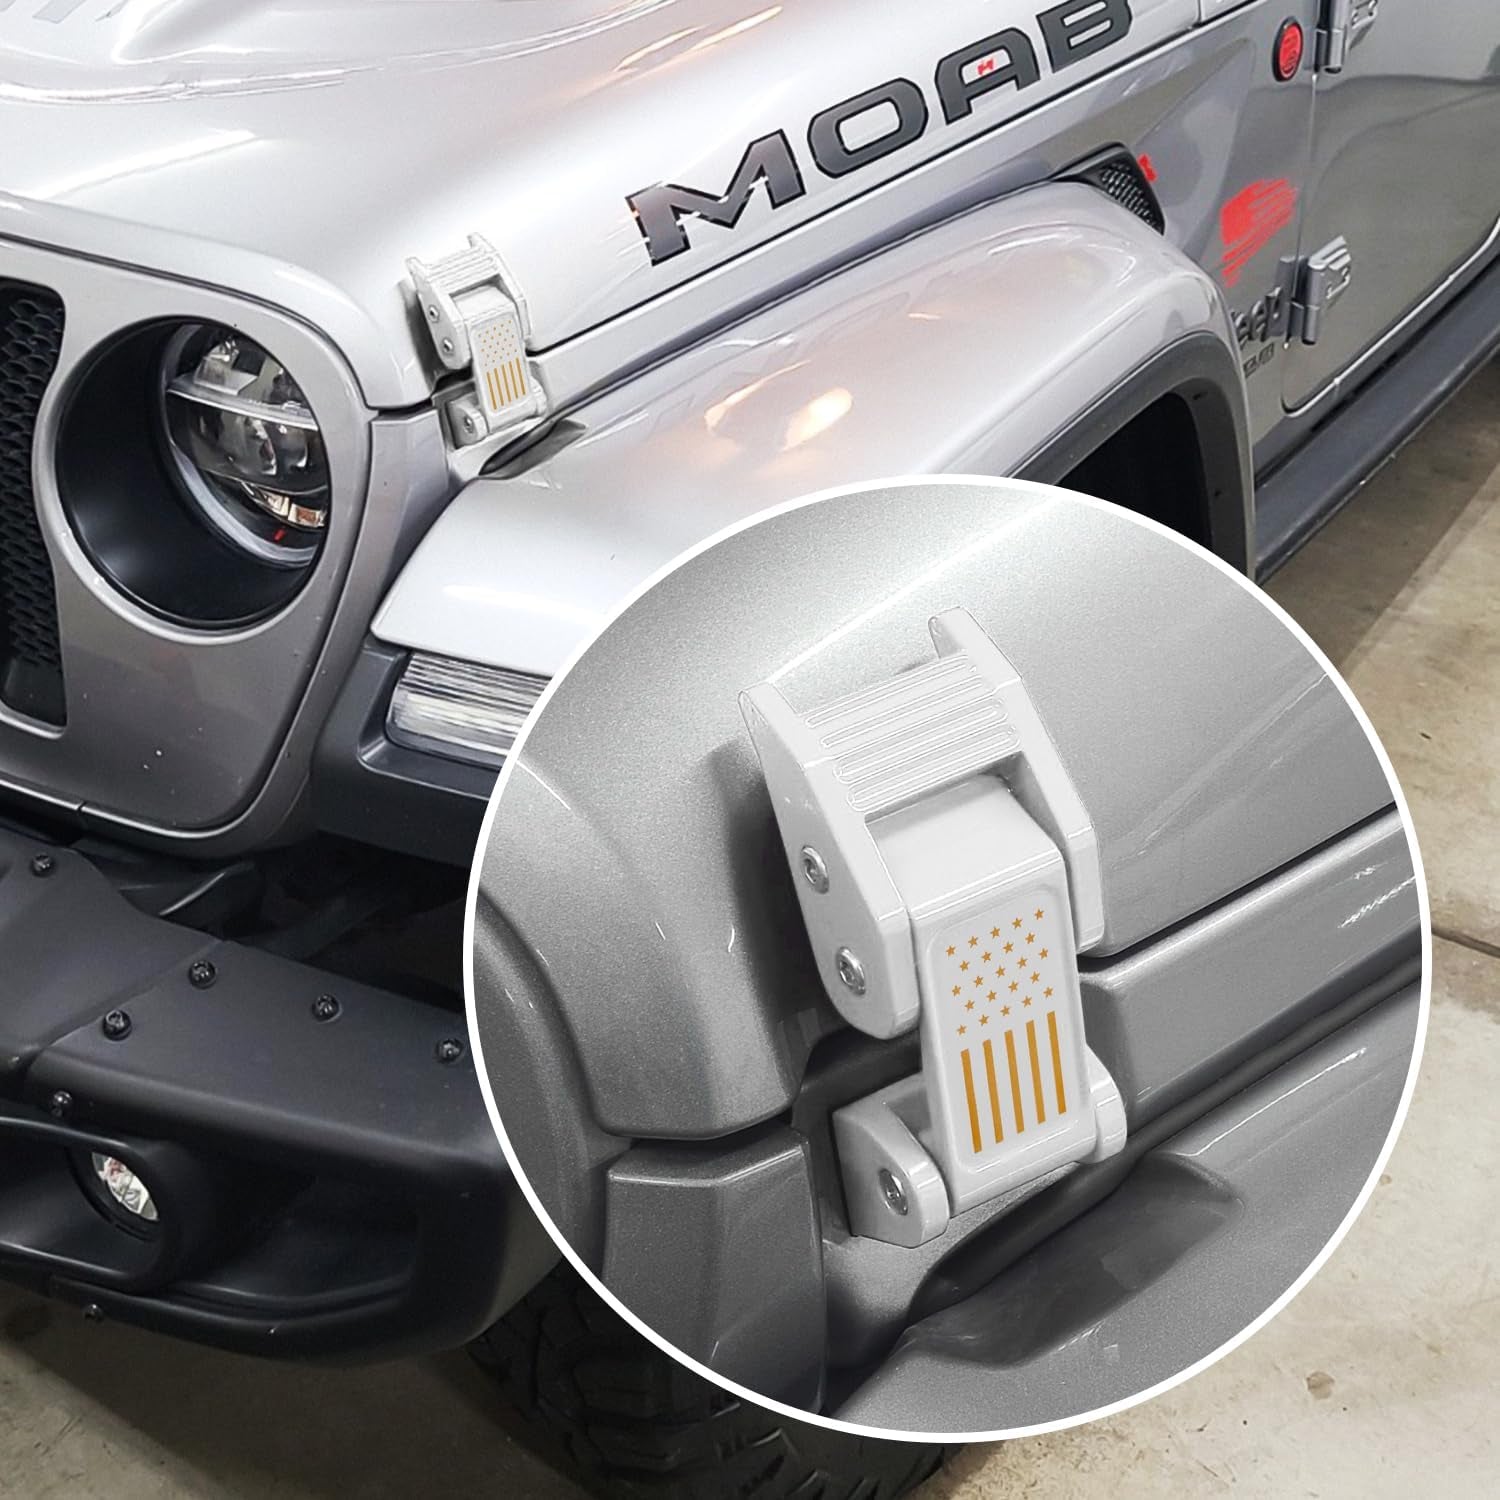 Aluminum Hood Latches Catch Kit with US Flag Style for 2007-2018 Jeep Wrangler JK JKU Unlimited & 2018-2020 Jeep Wrangler JL JLU, Jeep Wrangler Accessories Parts (White)